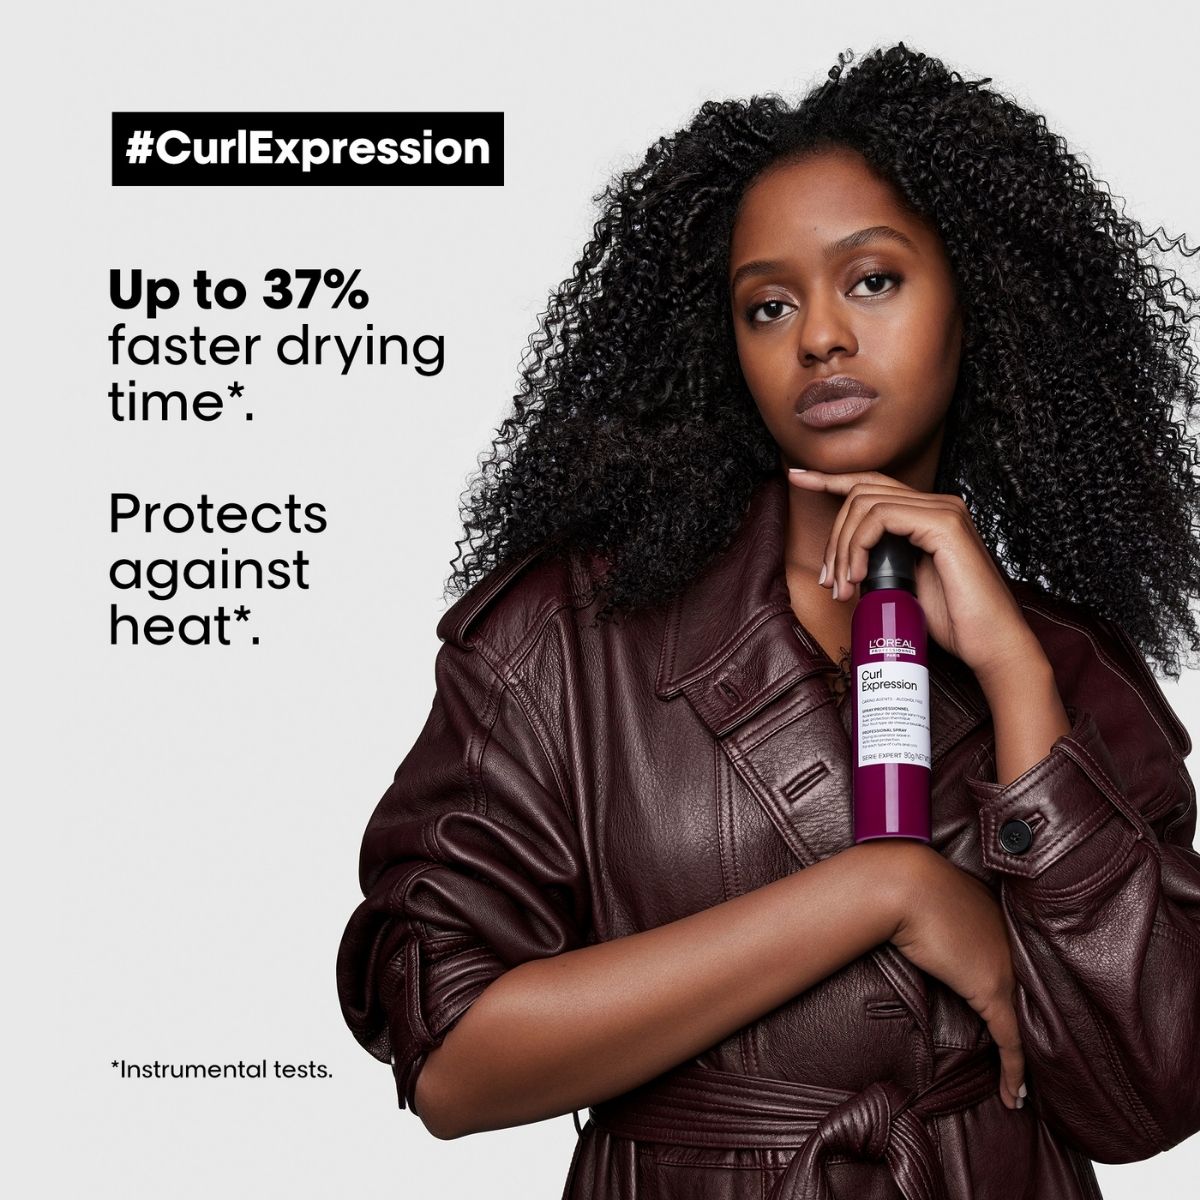 L'Oréal Professionnel Curl Expression Drying Accelerator